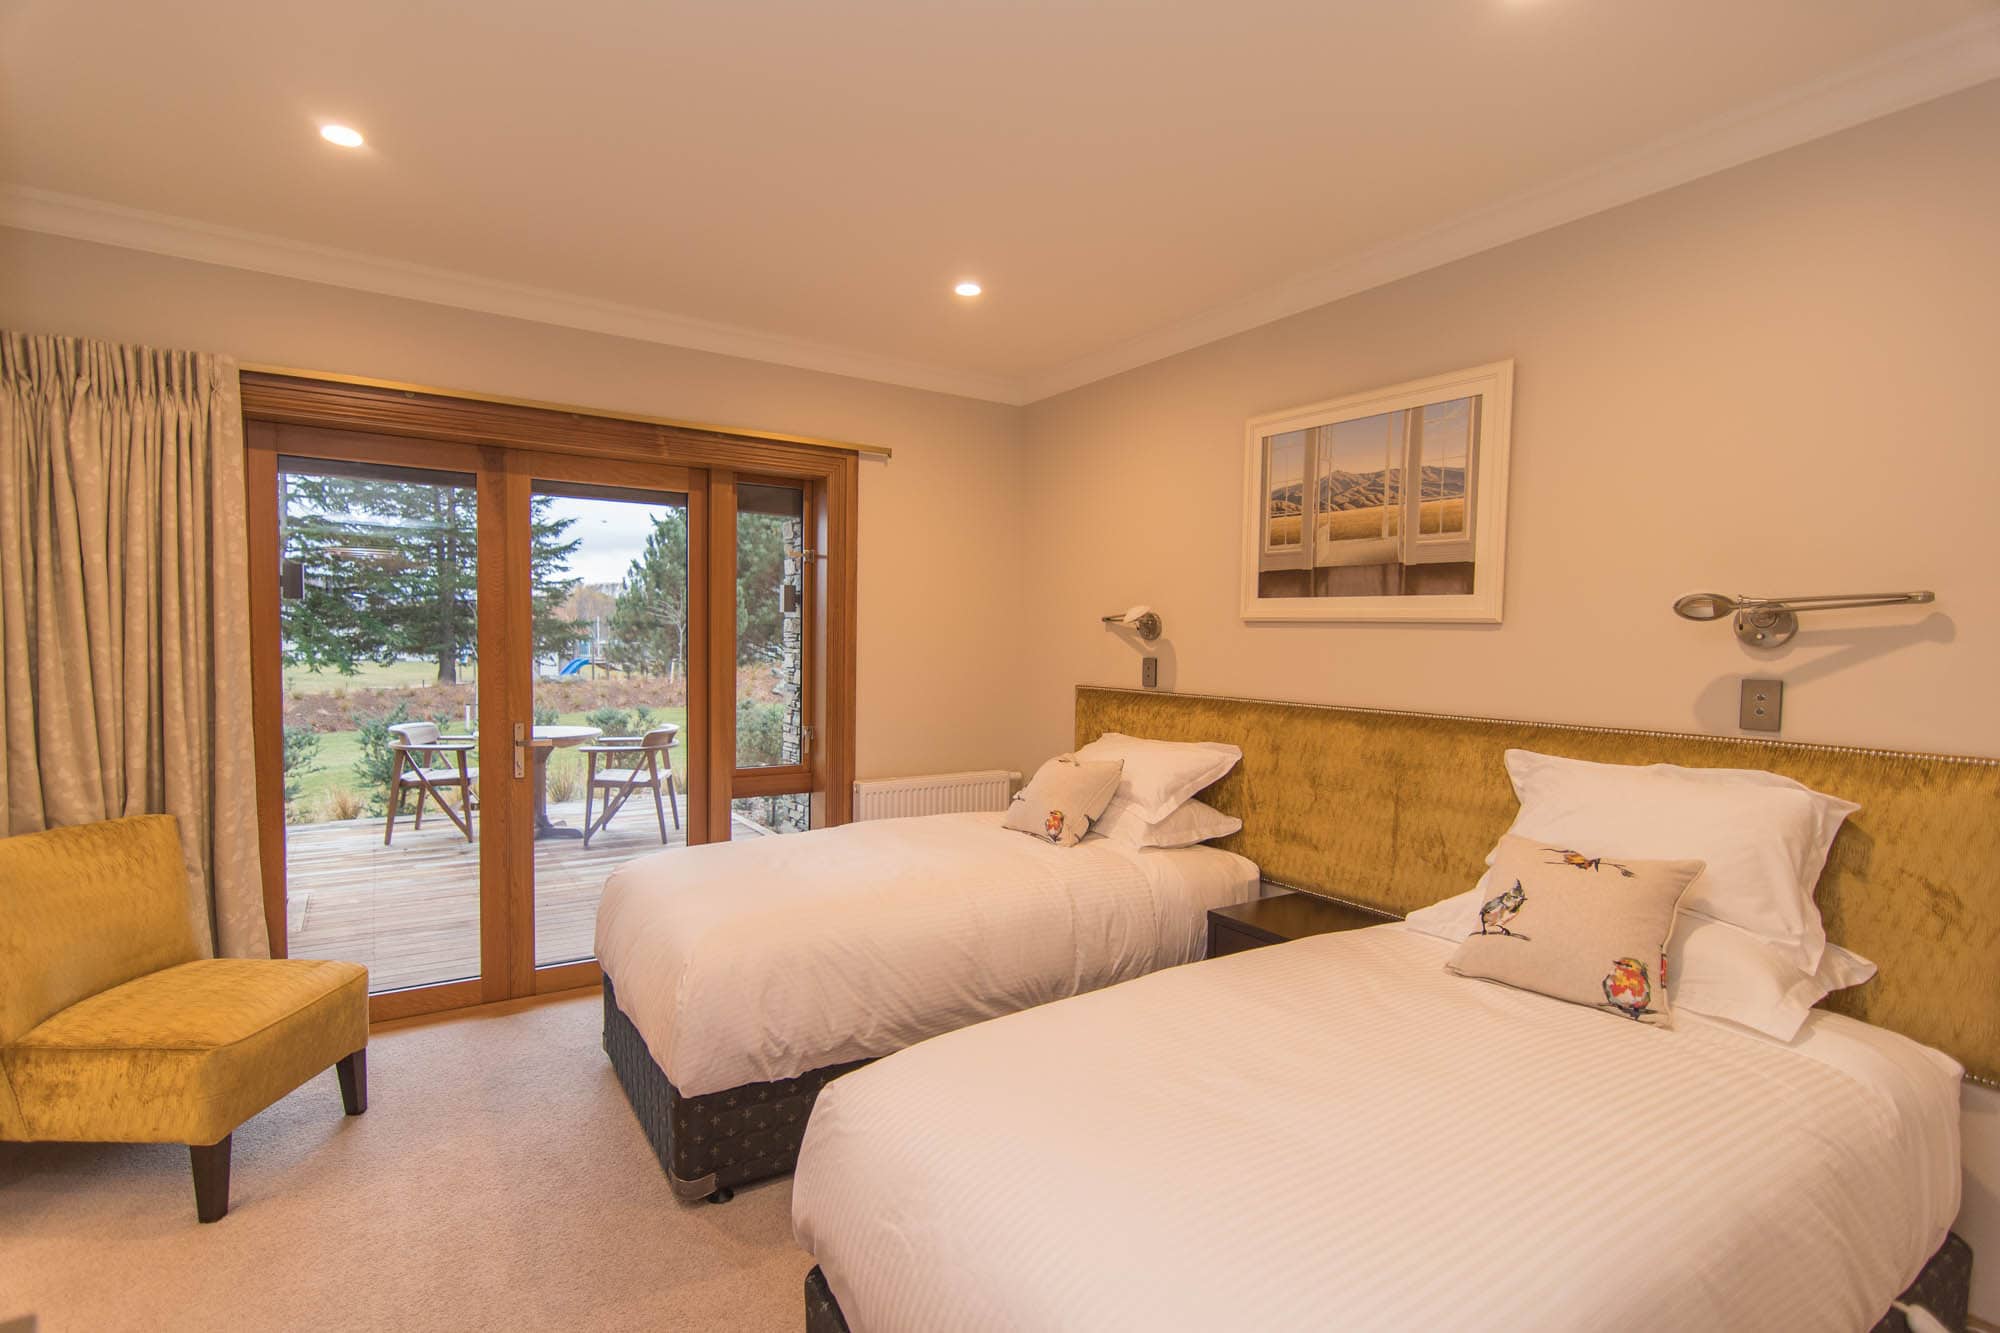 King single beds in this guest bedroom add extra comfort for a weary traveler  Gingko leaves look give an added point of interest to this En suite  The wool bale stencil names each individual room.  Once of the 3 guest bedrooms of this lodge  A merino fle